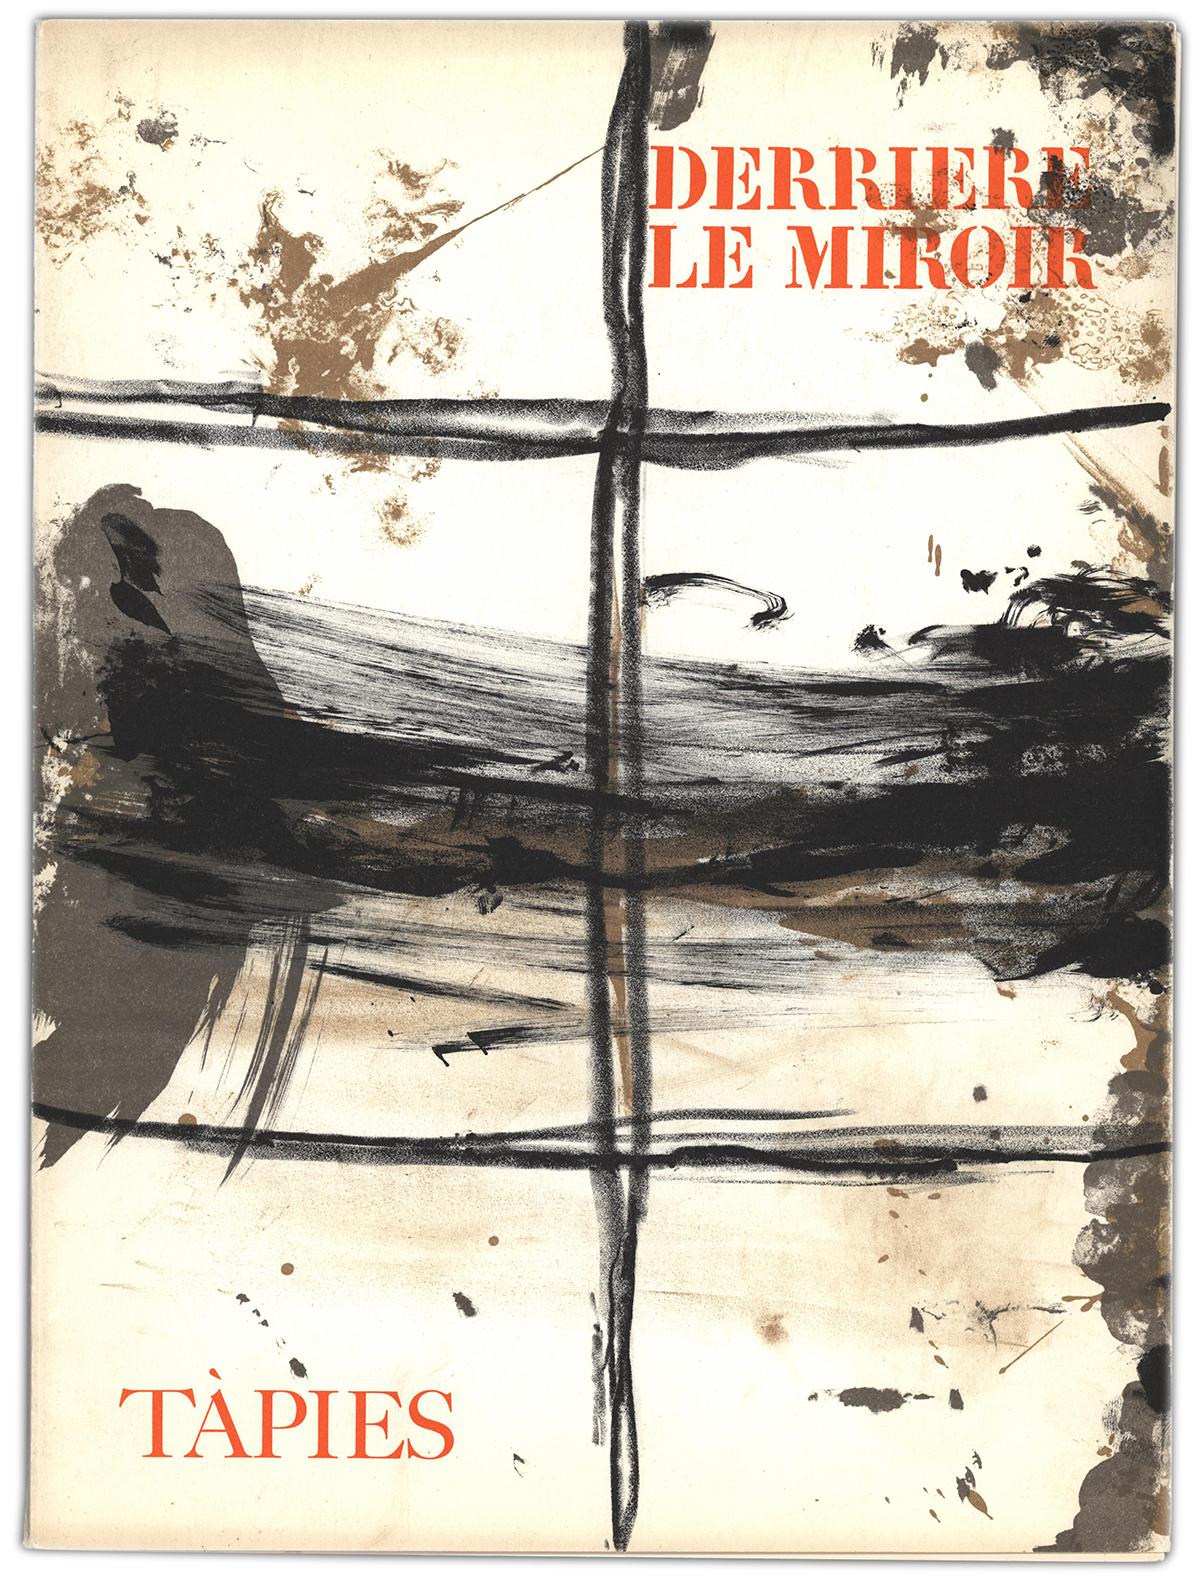 1960s Antoni Tàpies Lithographic cover to Derrière le miroir:

Lithographic publication cover; circa 1968.
11 x 15 inches.
Good overall vintage condition as pictured.
Unsigned from an edition of unknown. 
Well suited for matting & framing.

Derrière